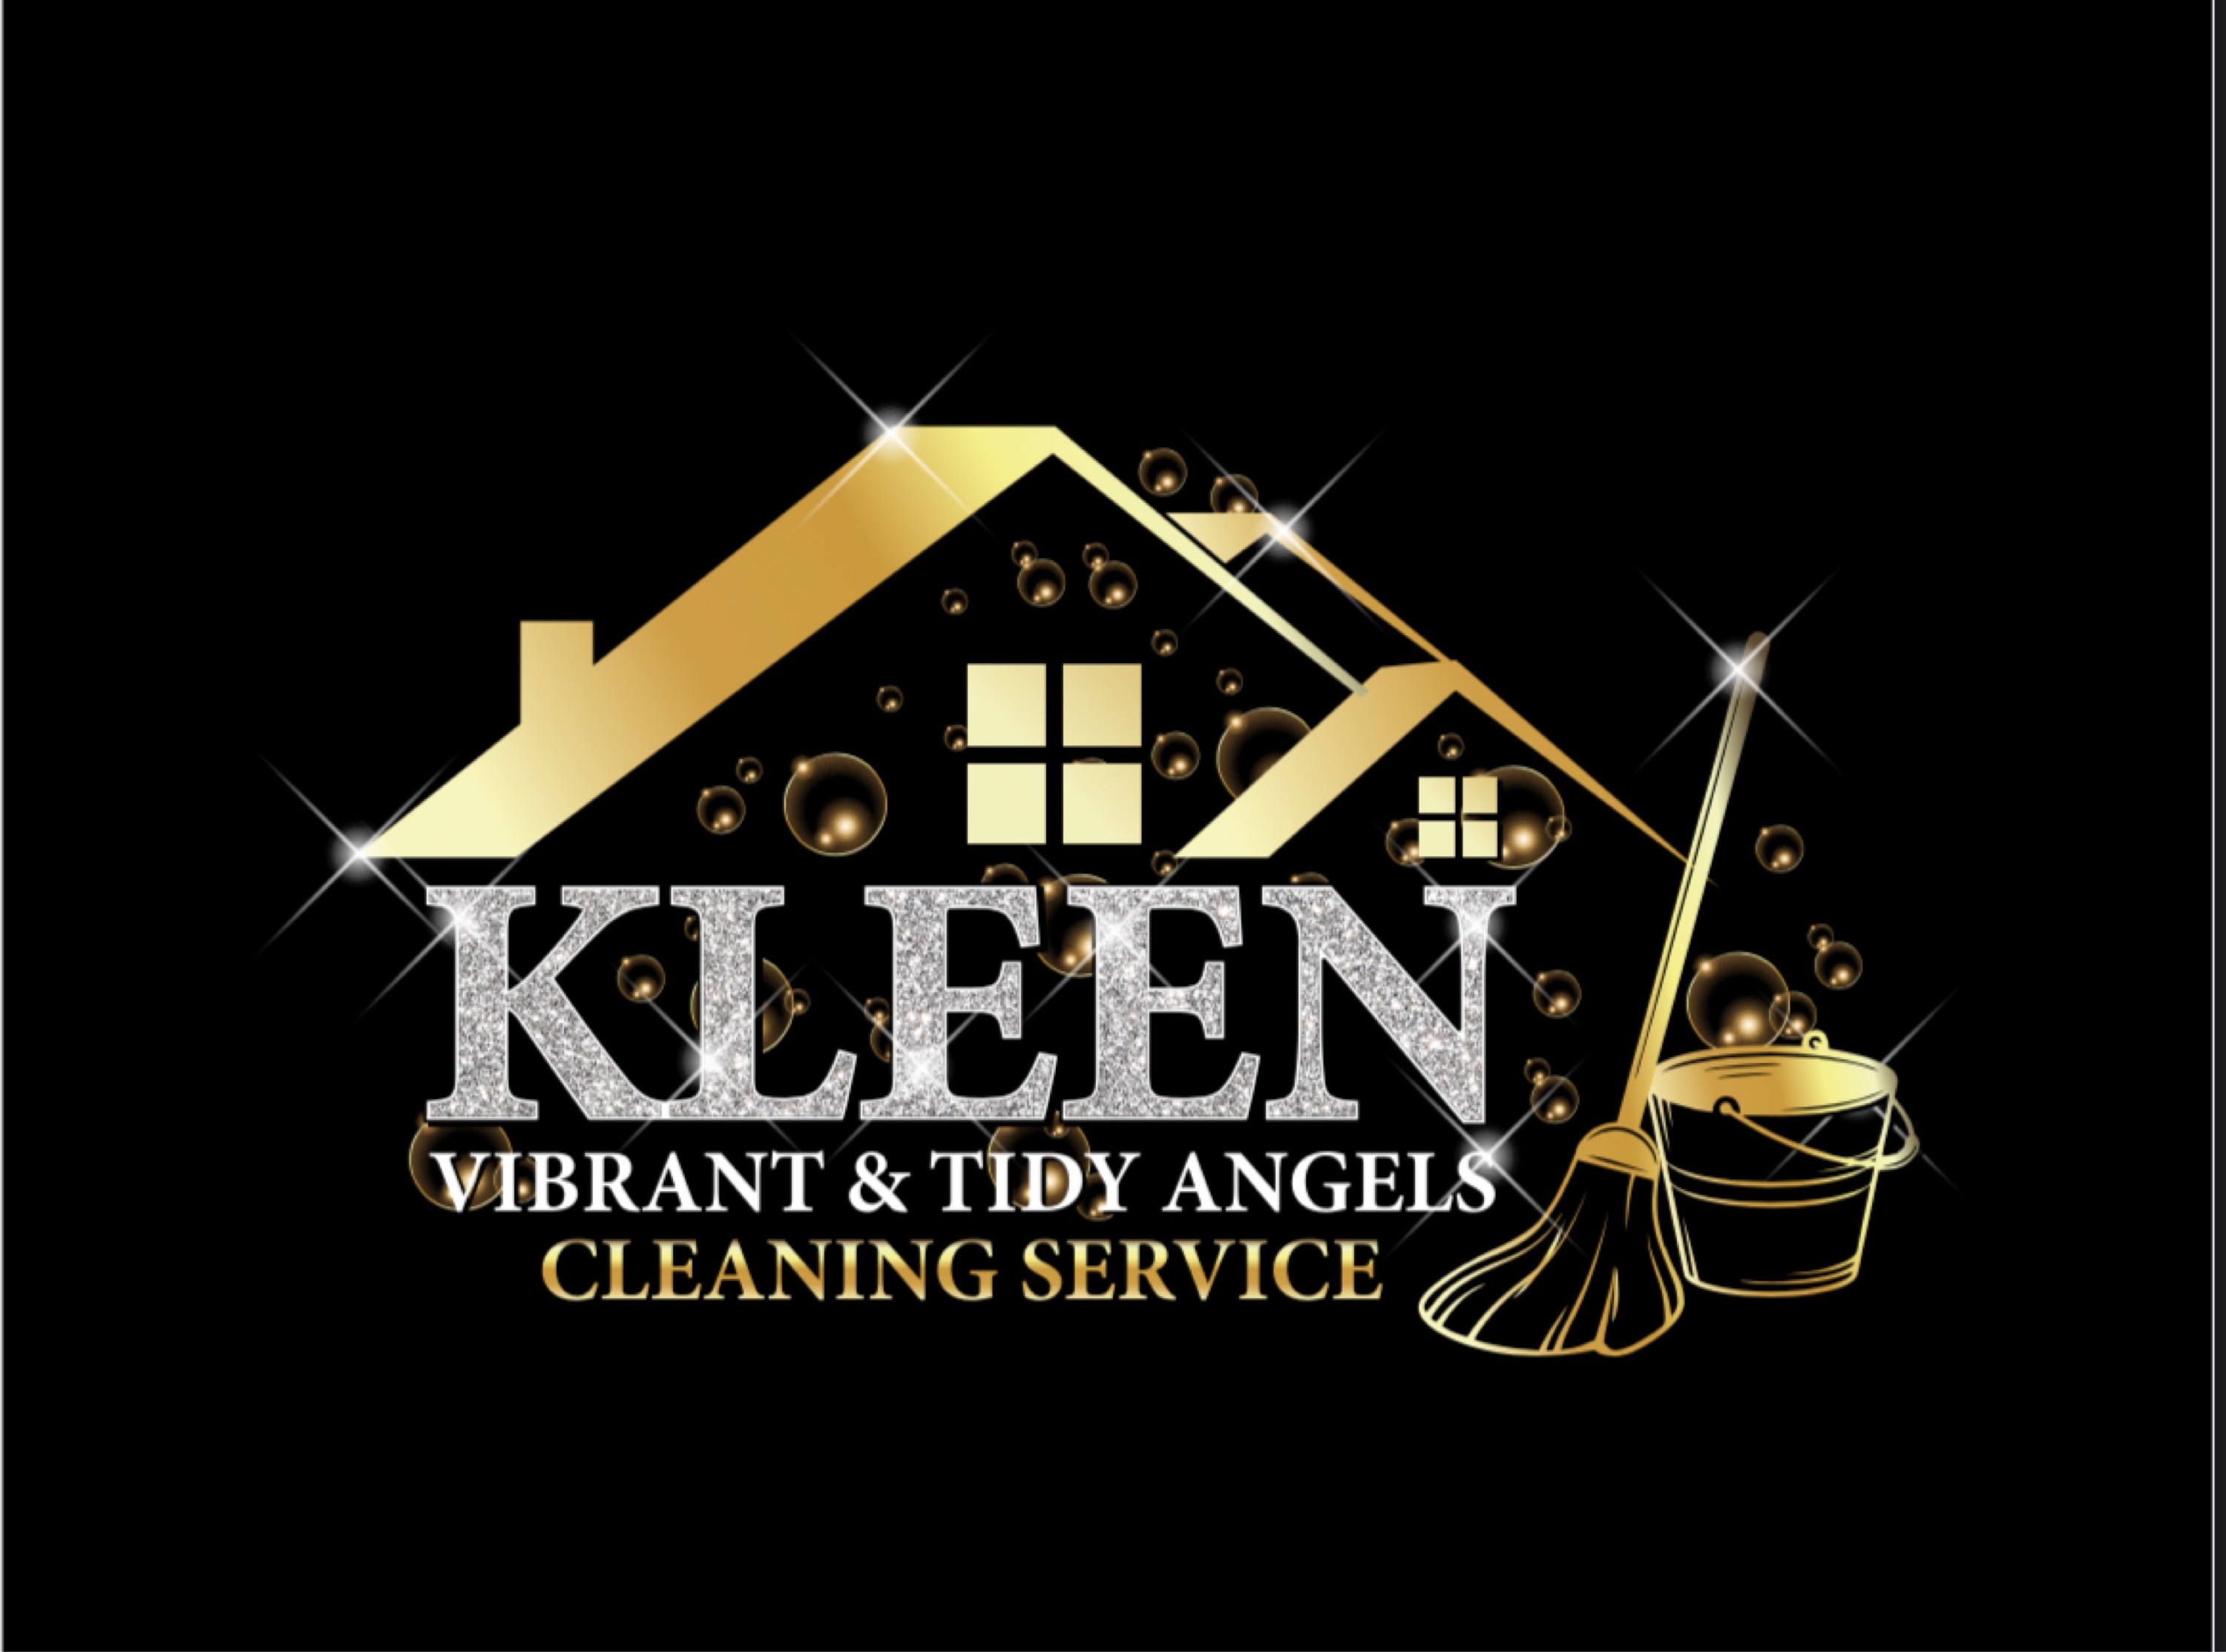 Kleen Vibrant Tidy Angels Cleaning Service Logo